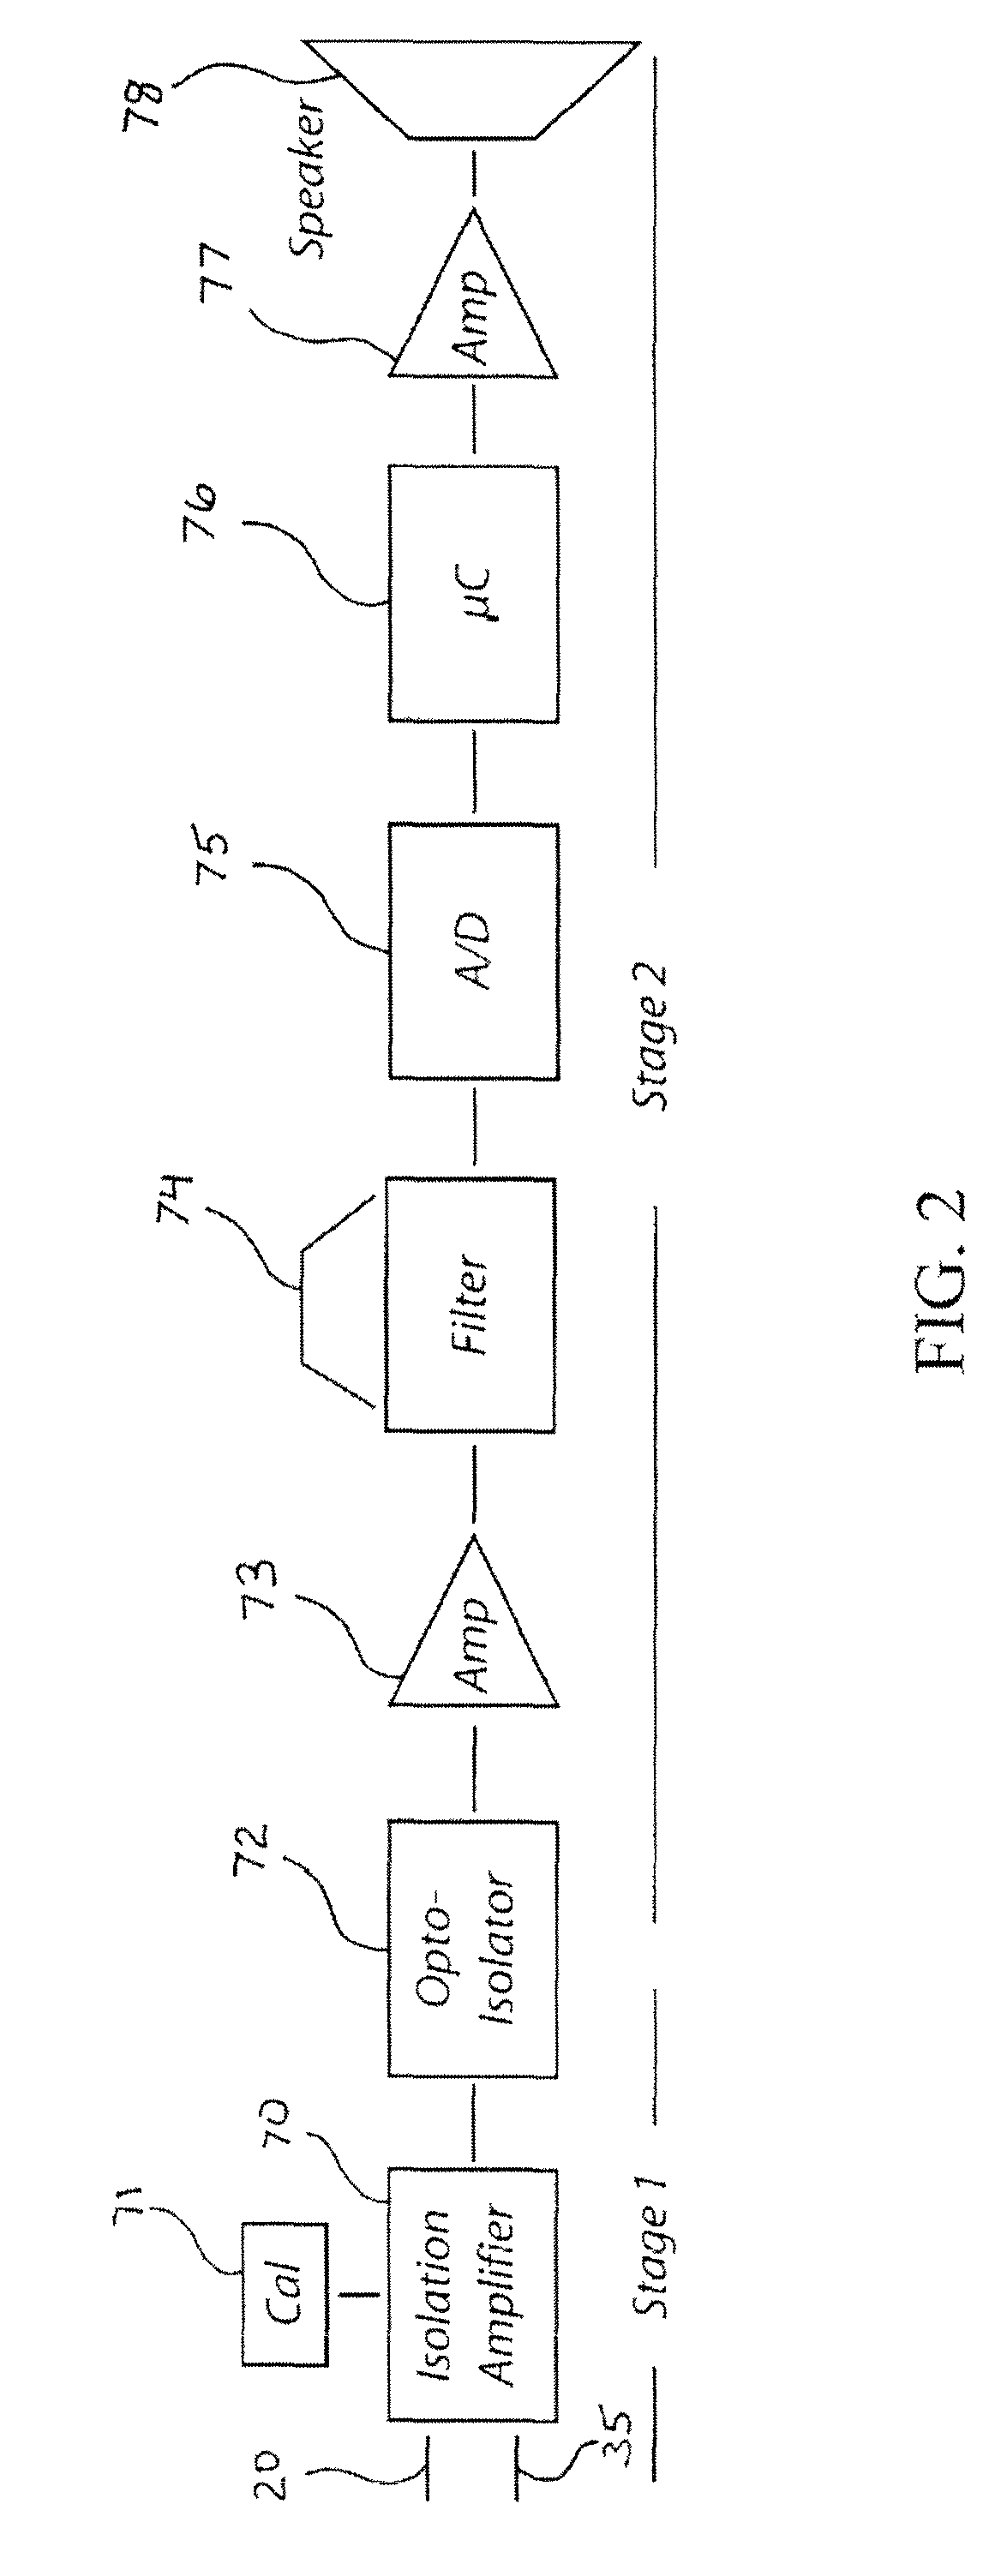 Methods and devices for differentiating between tissue types